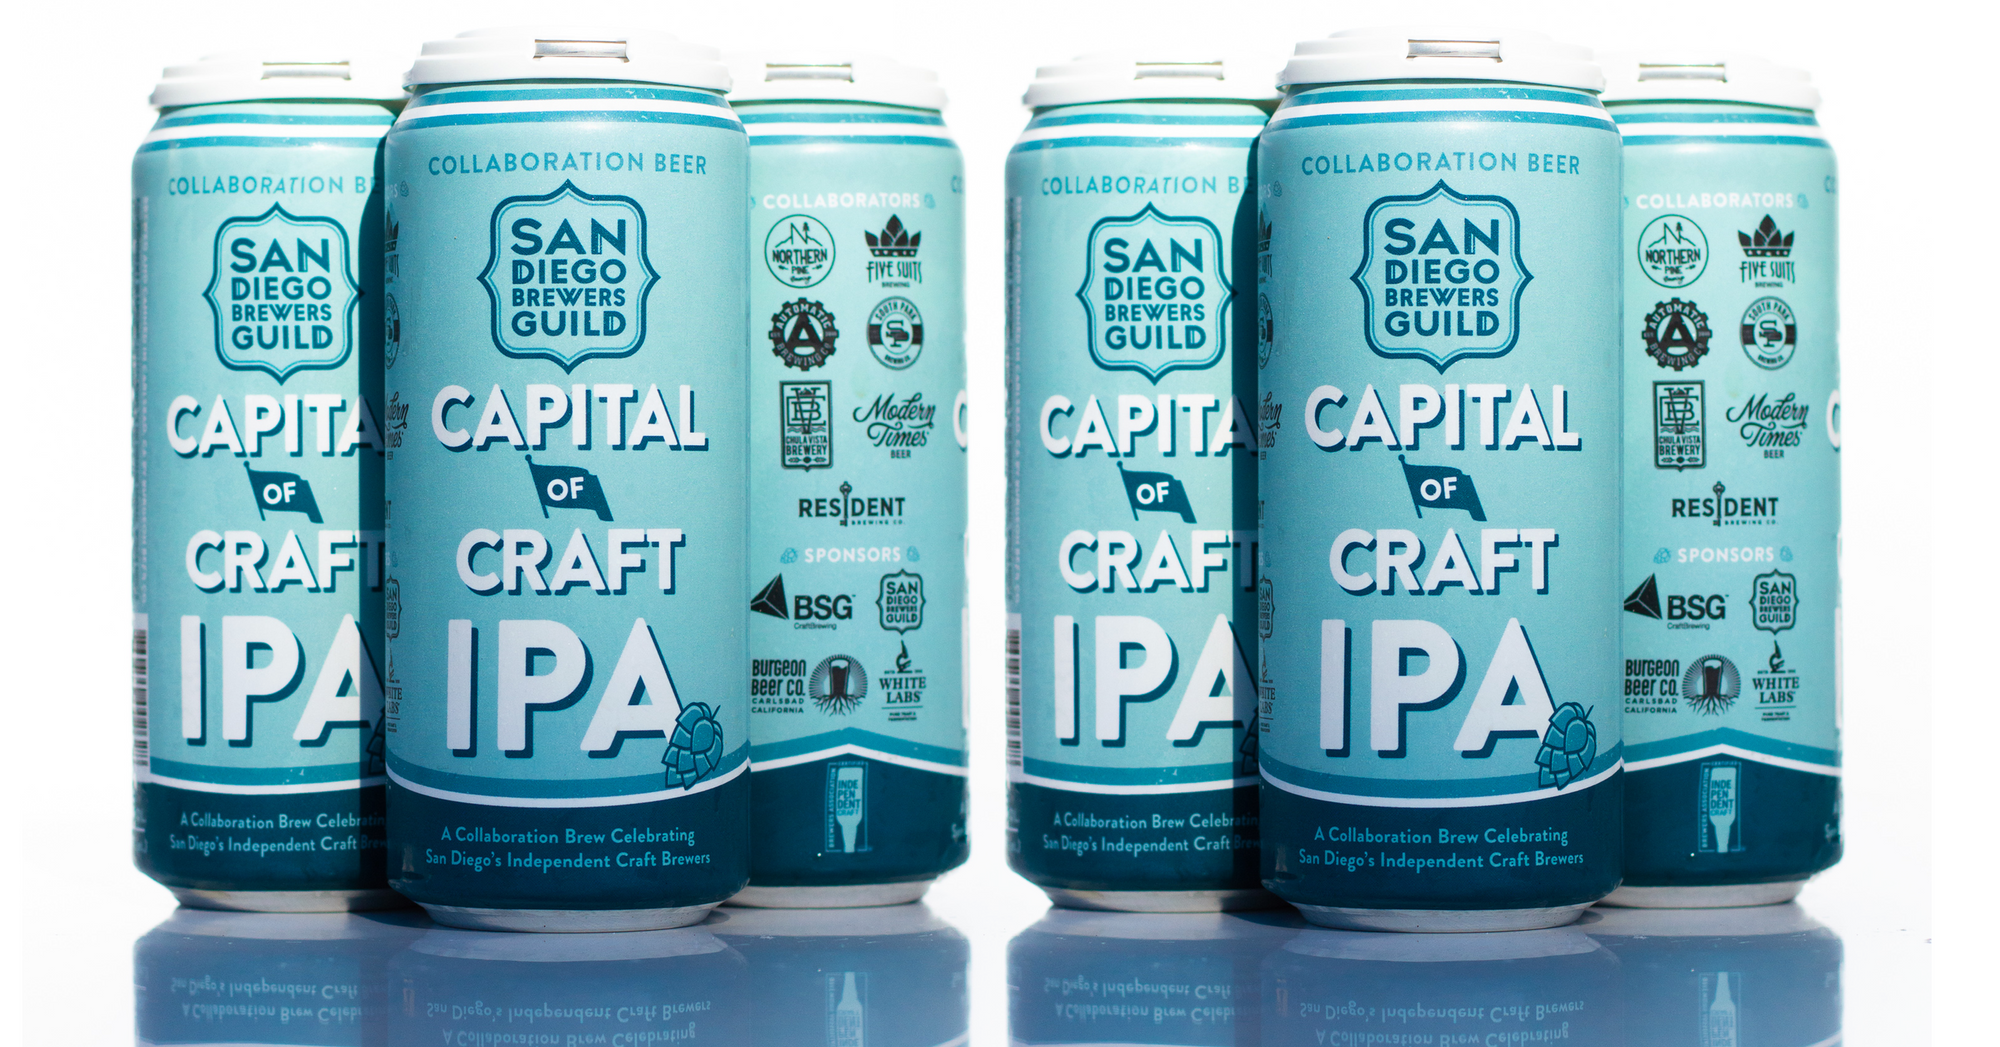 Can, Draft, and Special Cask Release of Capital of Craft IPA